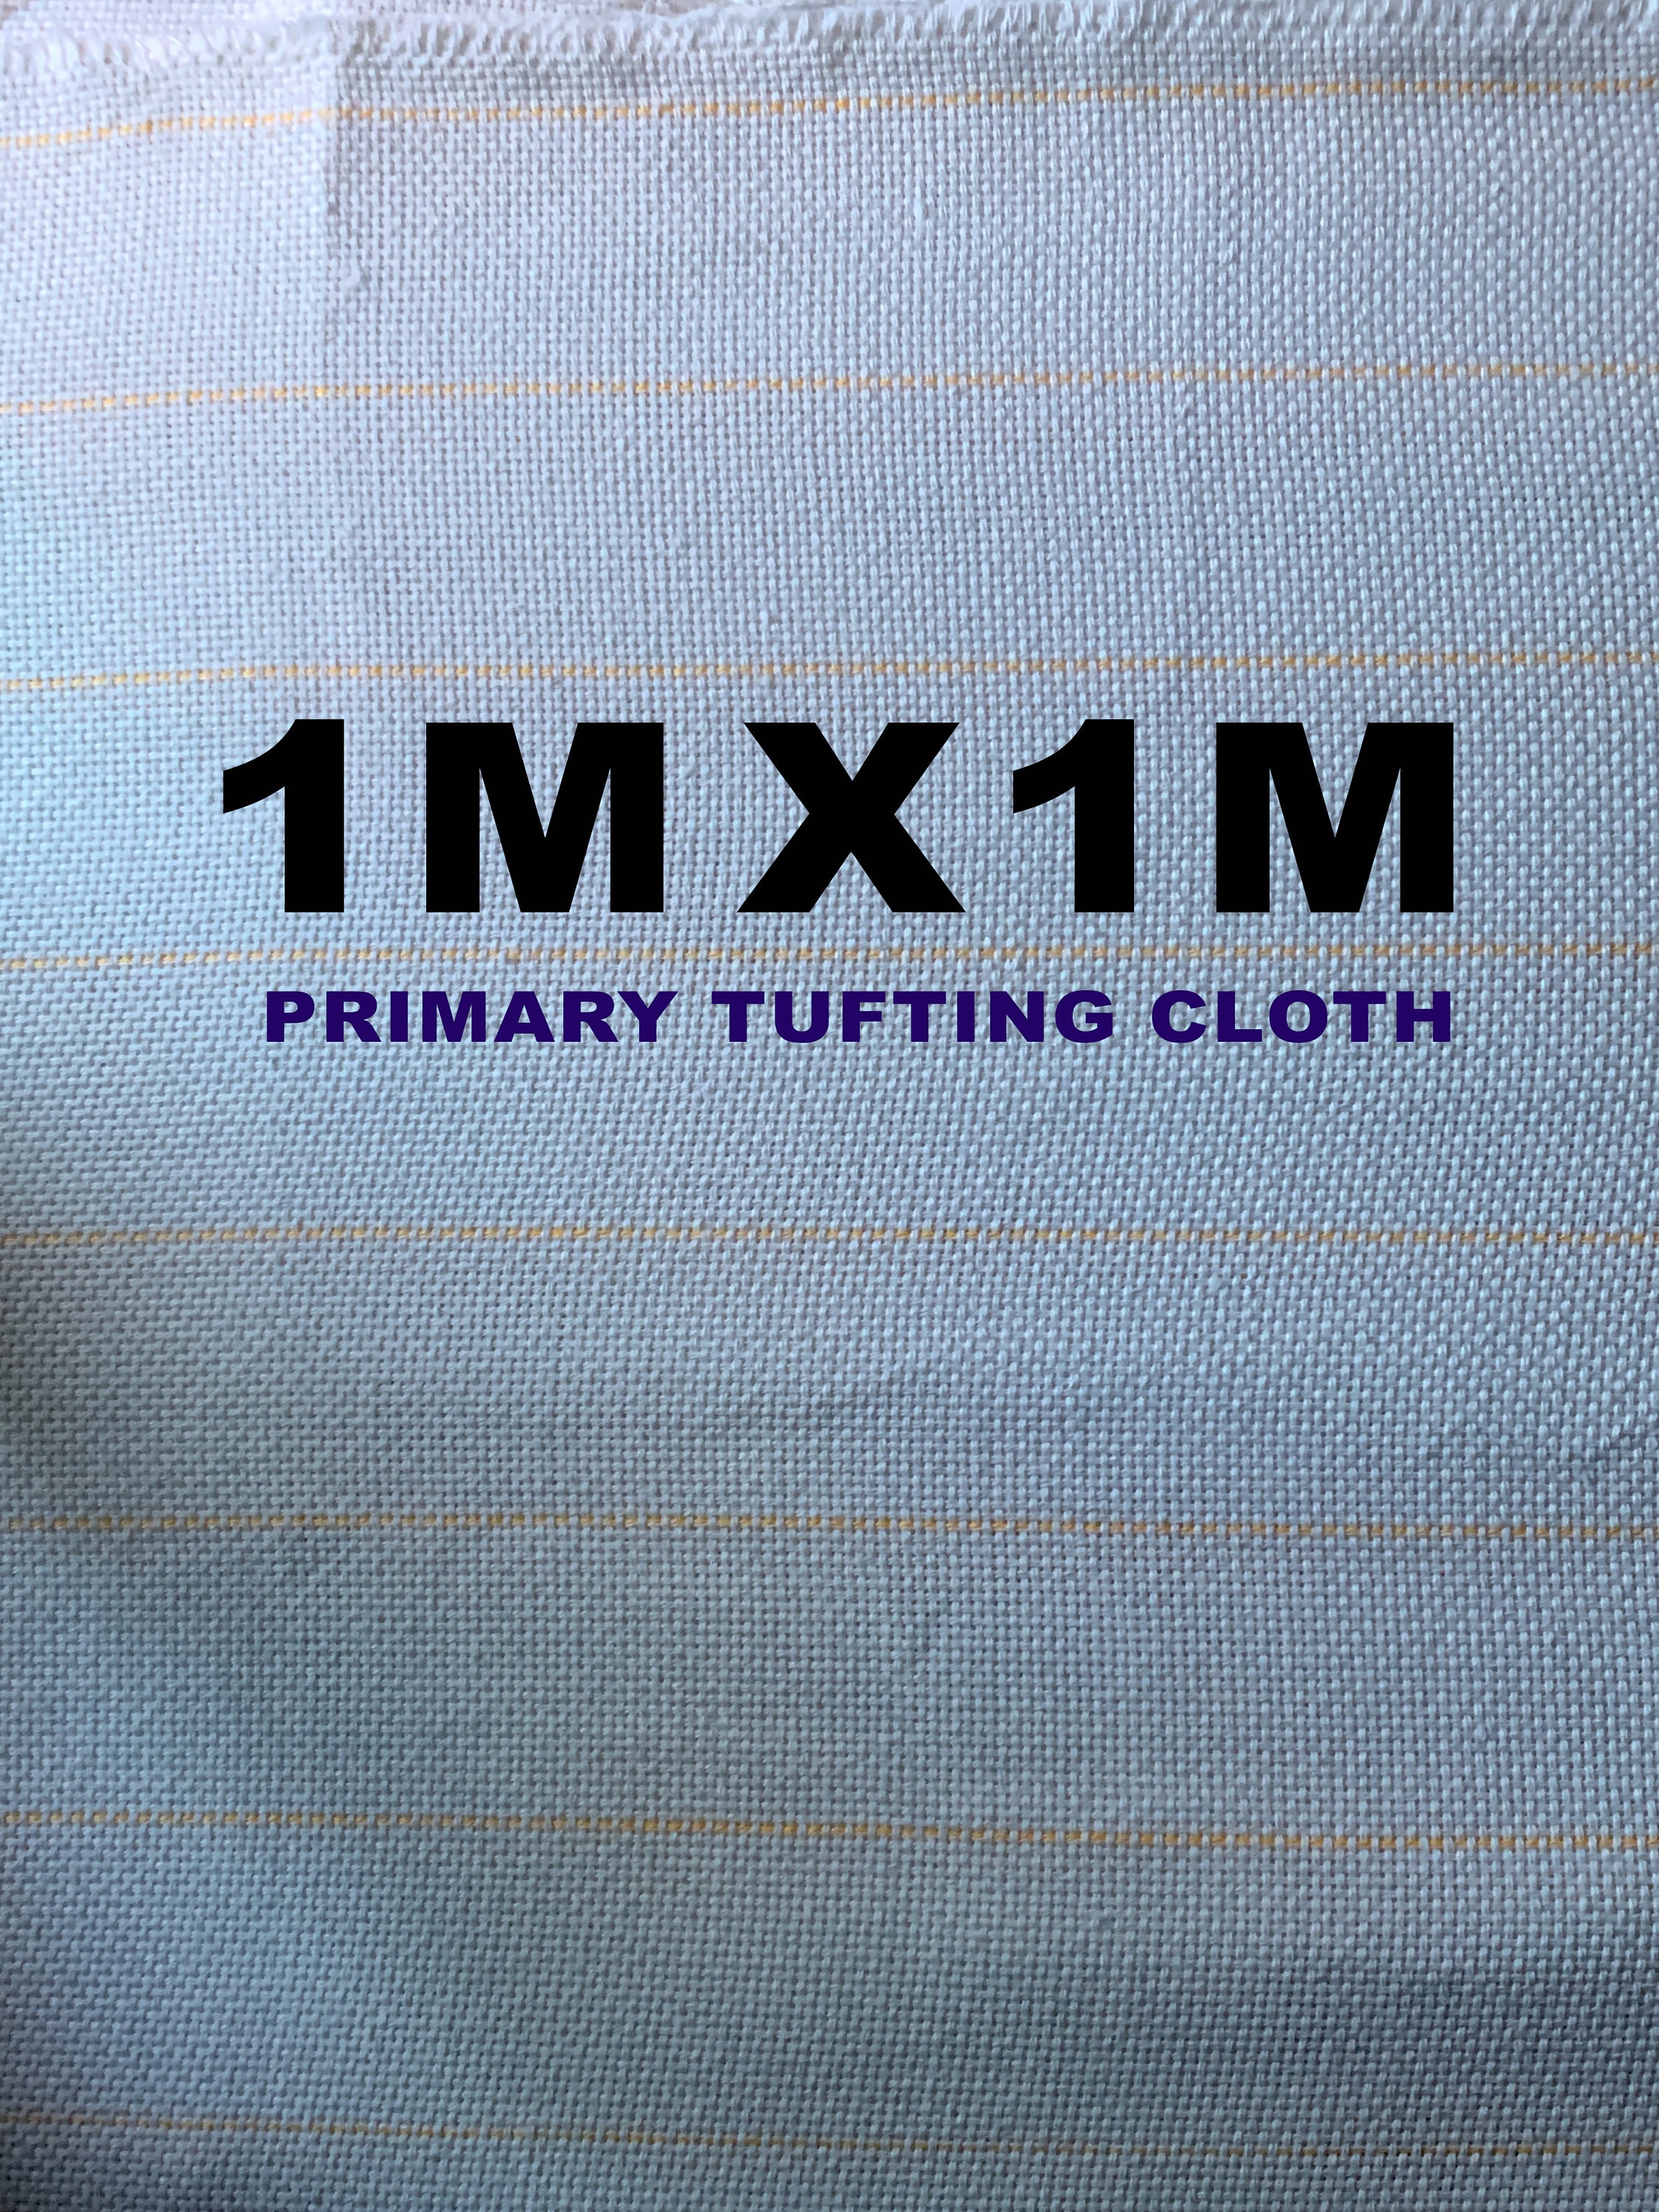 Tufting Cloth 1M X 1M Primary Rug Tufting Fabric for Tufting Guns Punch  Needle High Quality 